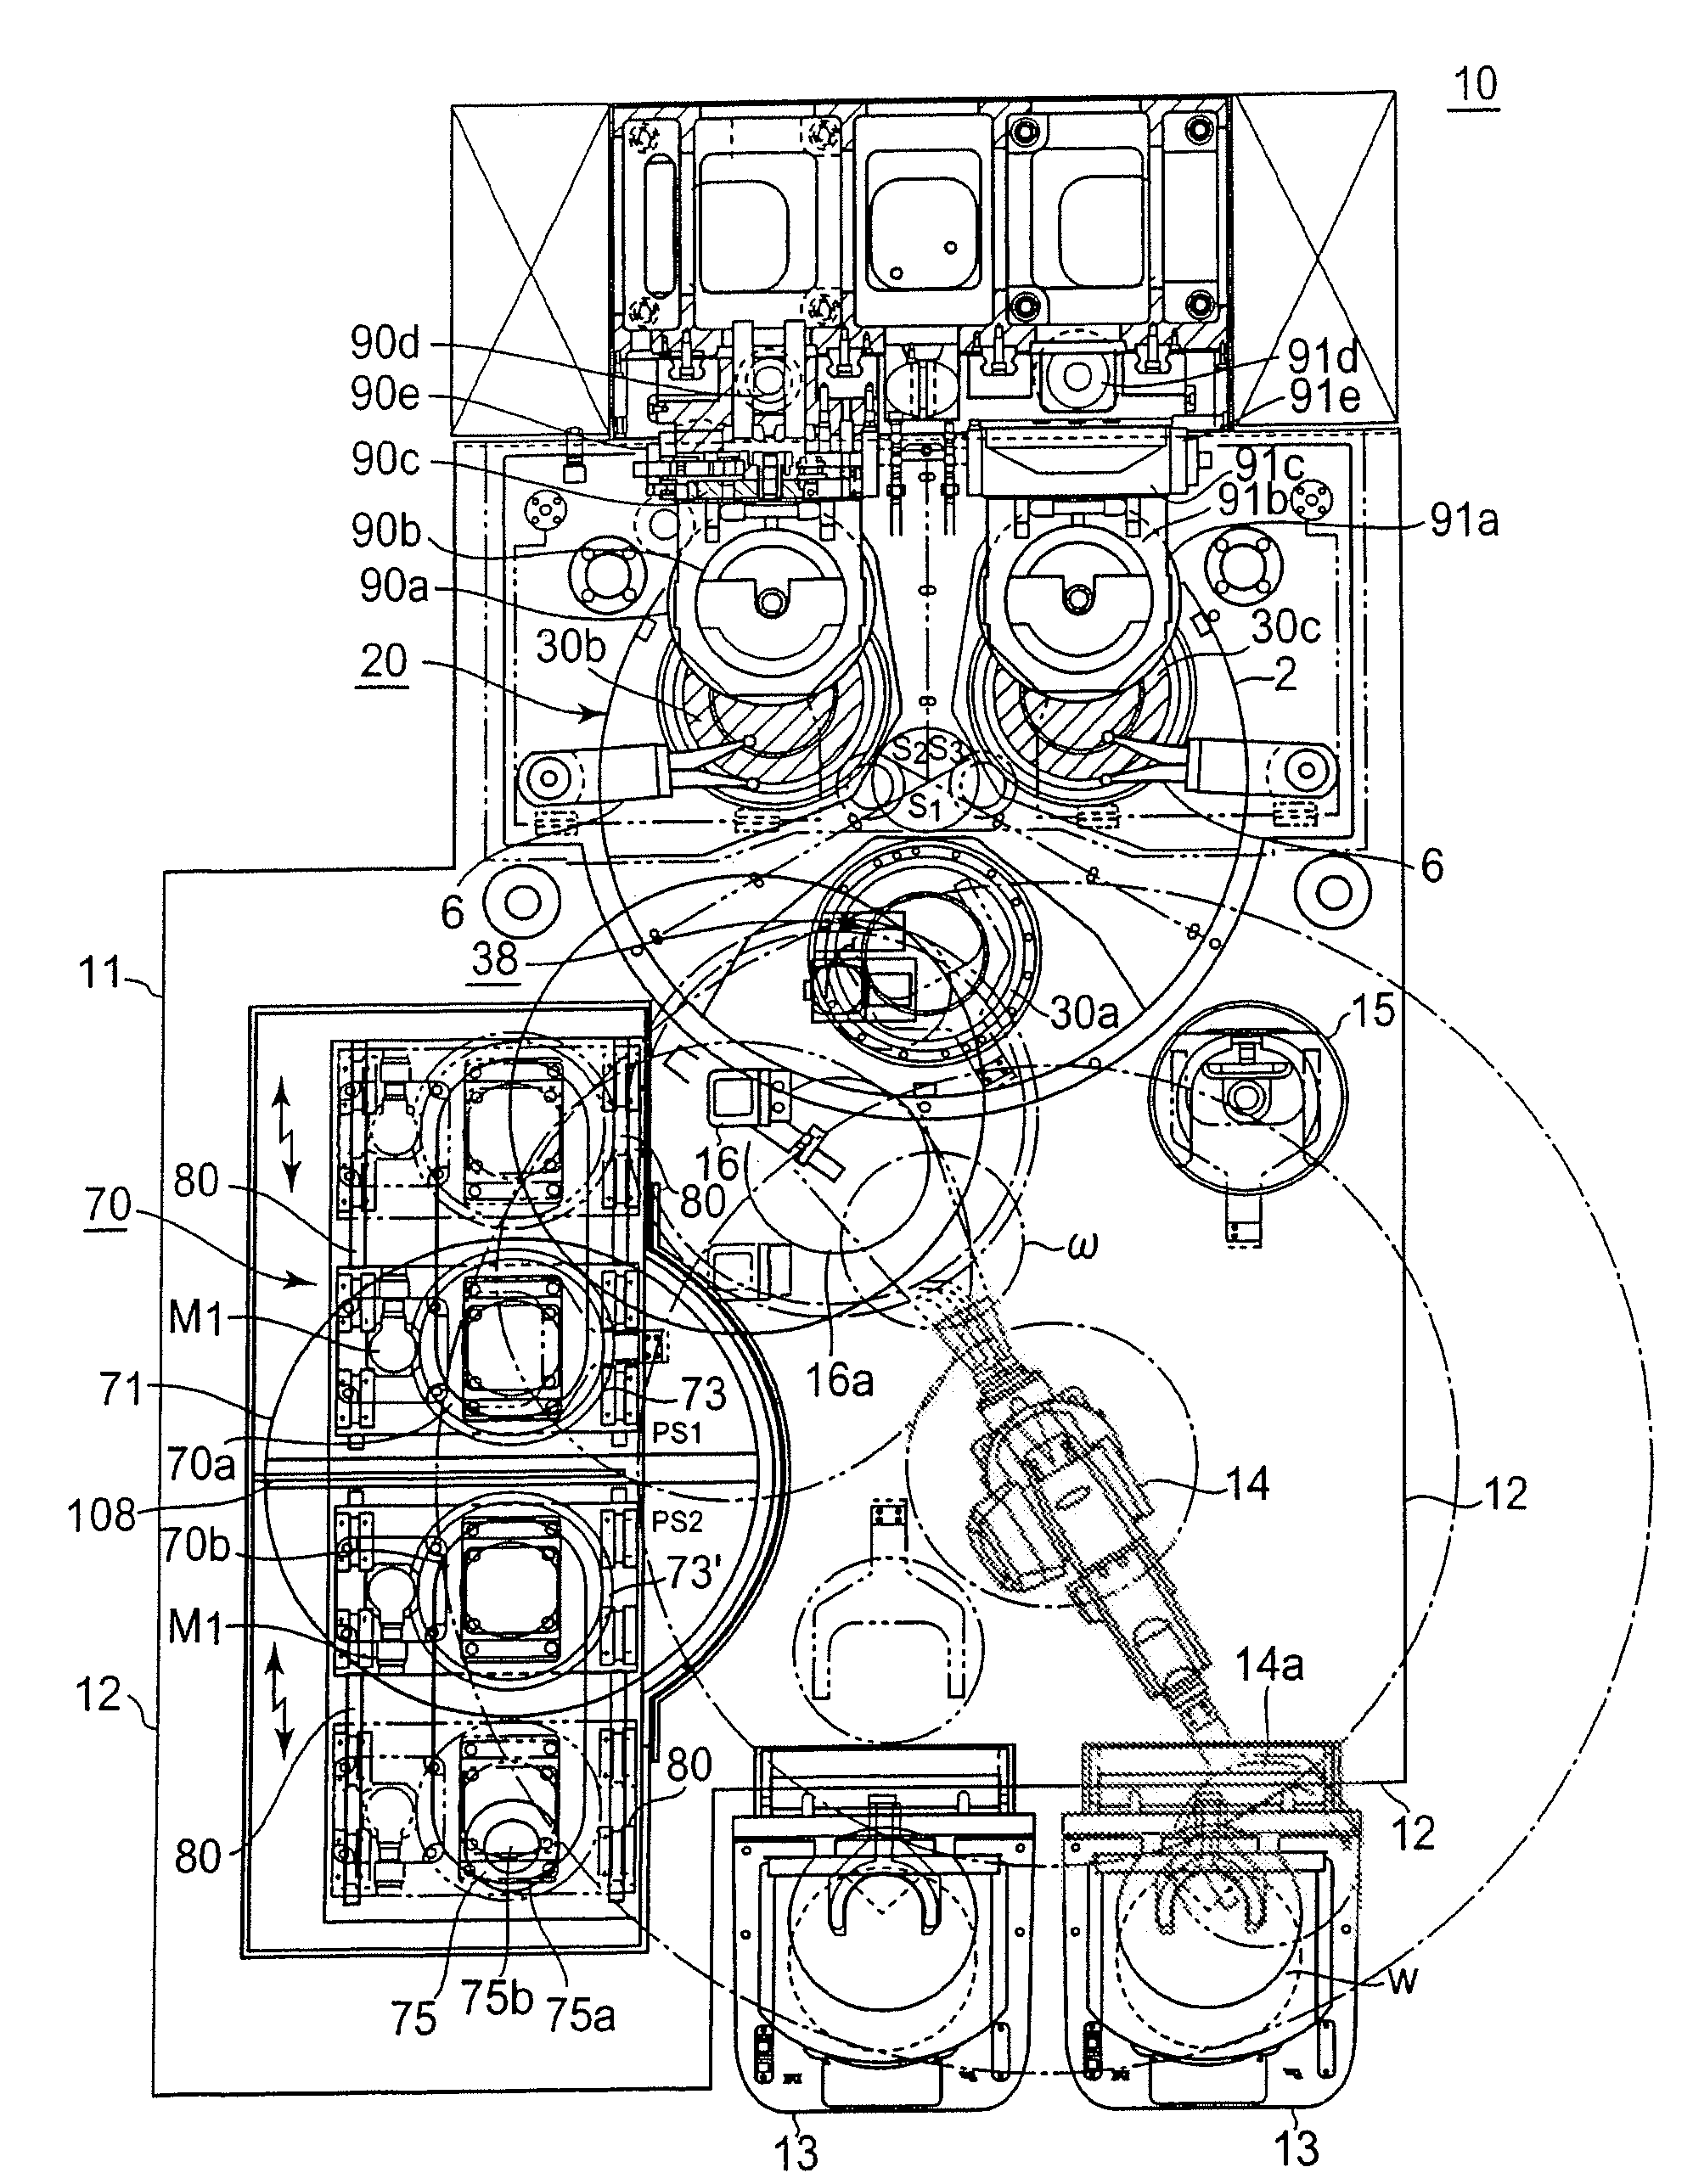 Planarizing device and a planarization method for semiconductor substrates